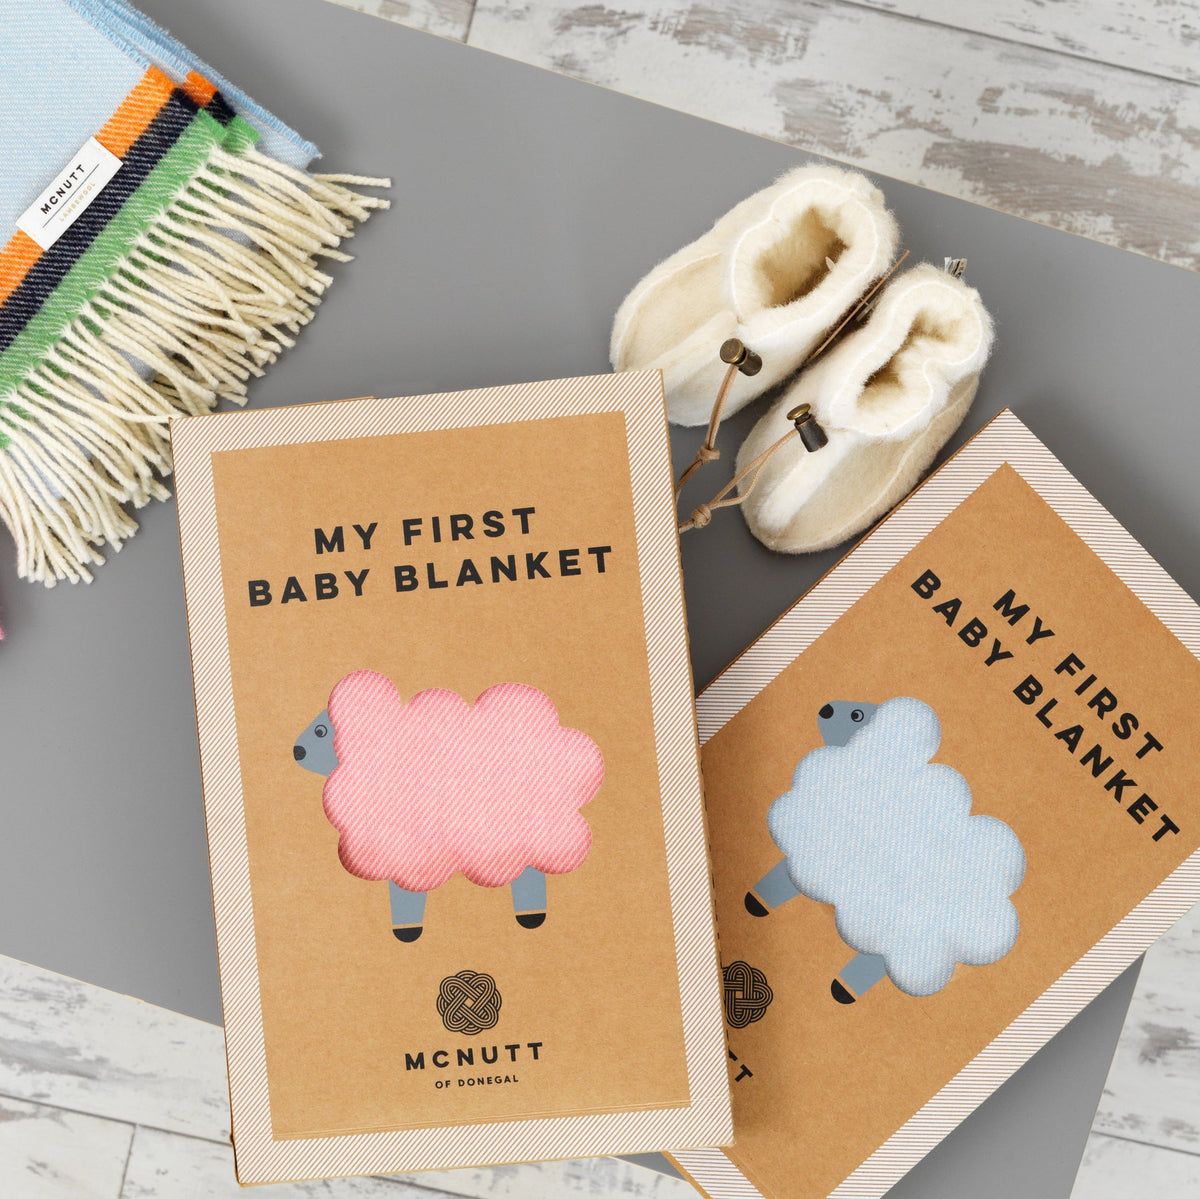 McNutt of Donegal Baby Blankets presented in a Gift Boxes